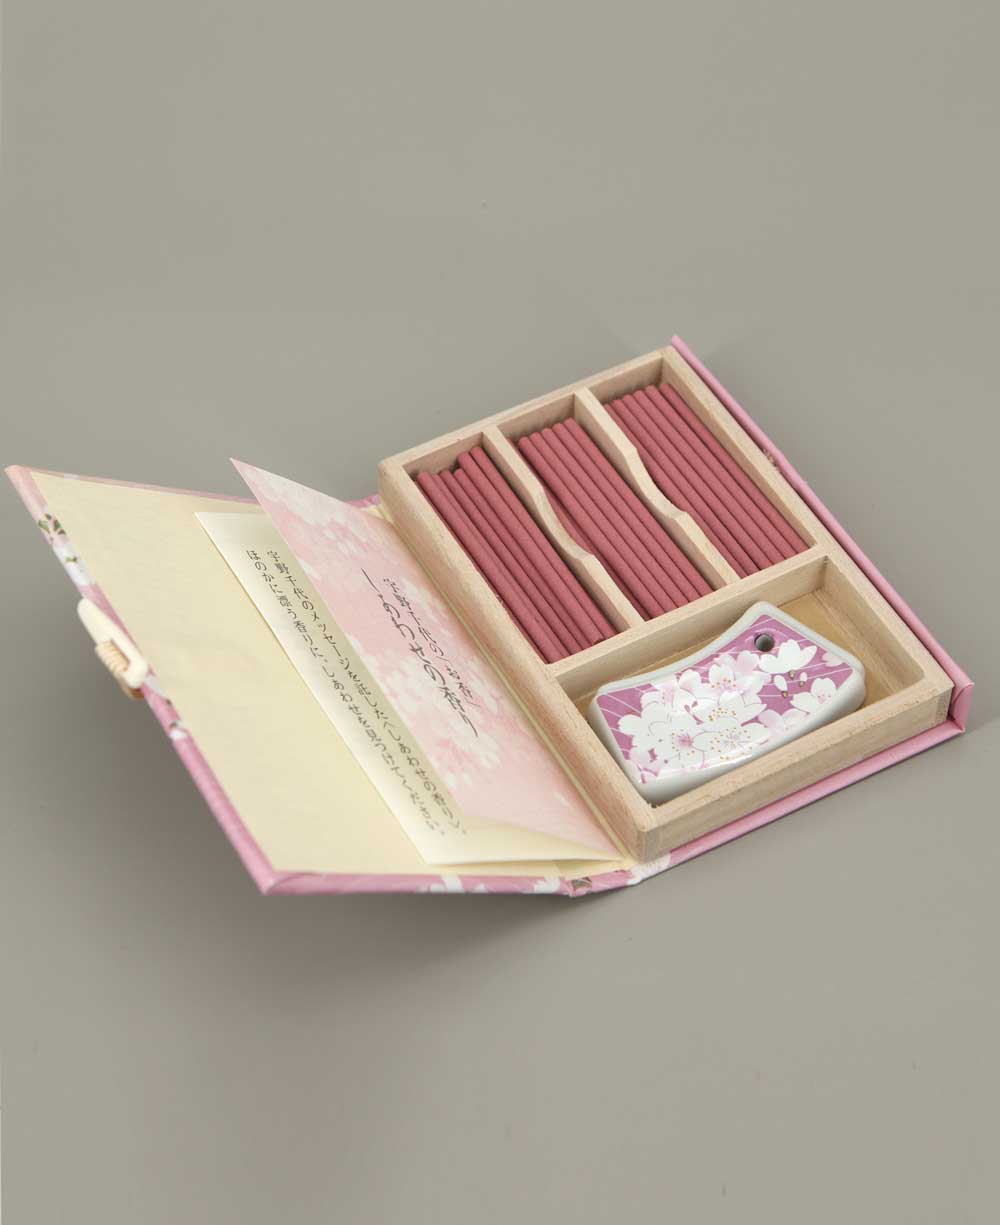 Cherry Blossom Happiness Japanese Incense - Incense